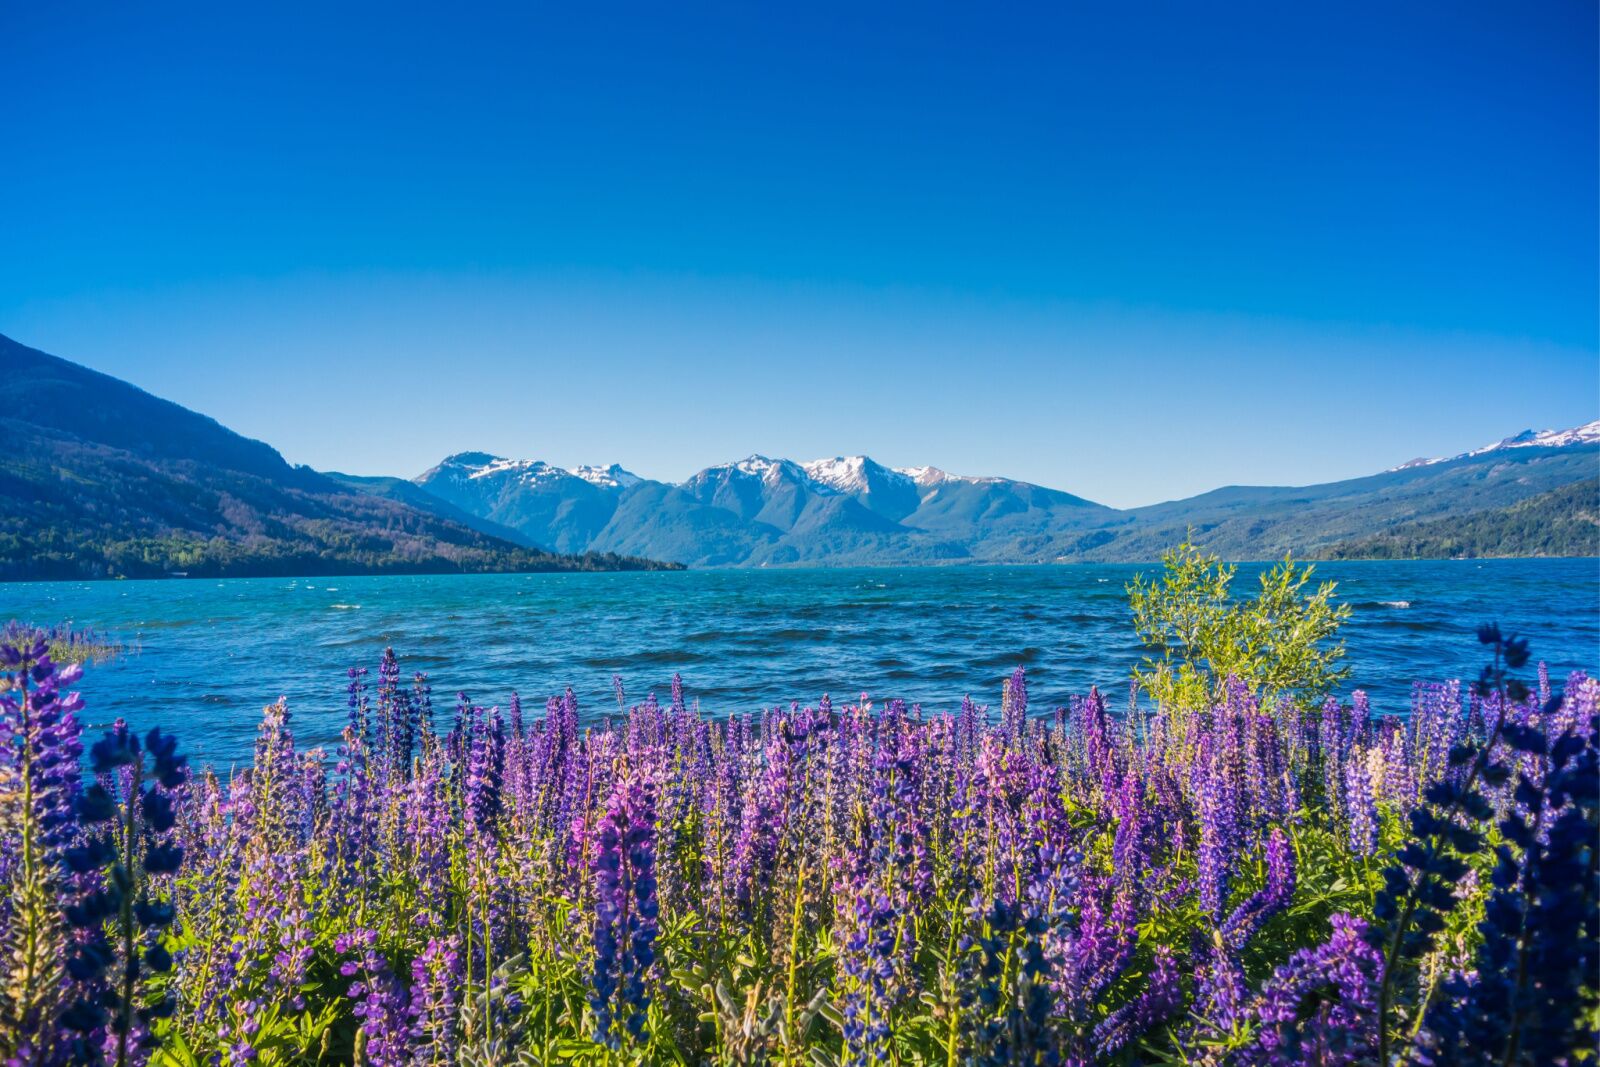 Purple flowers and a lake at Los Alerces National Park in Chile